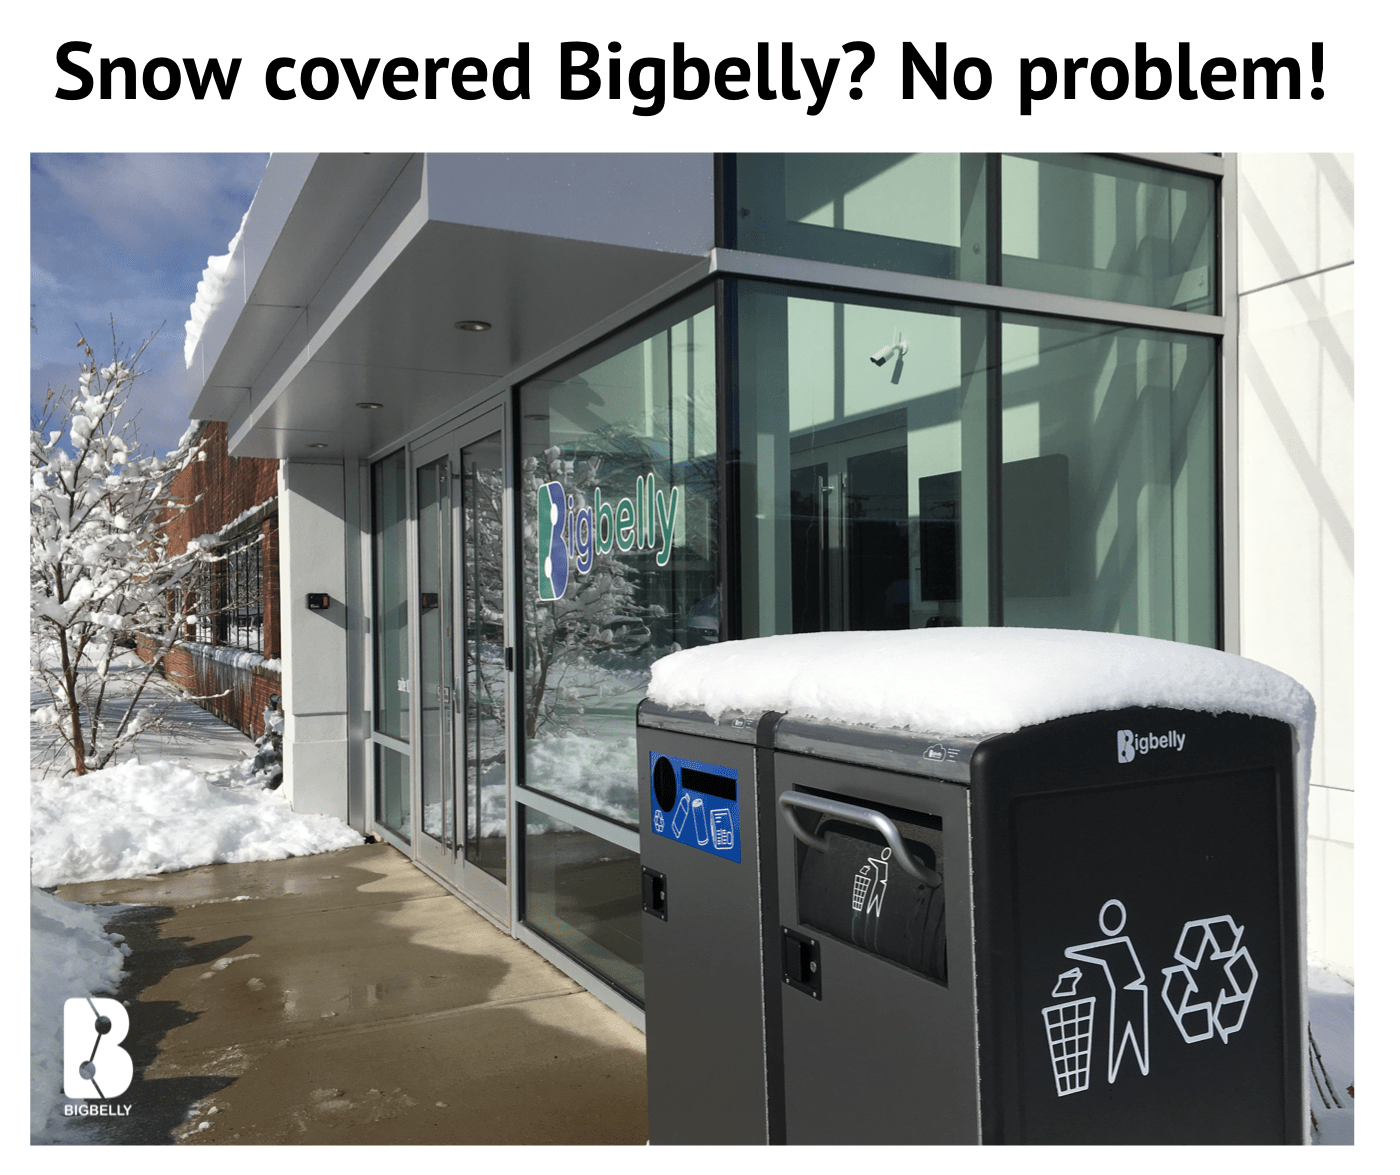 Snow Covered Bigbelly Continues to Do Its Job!